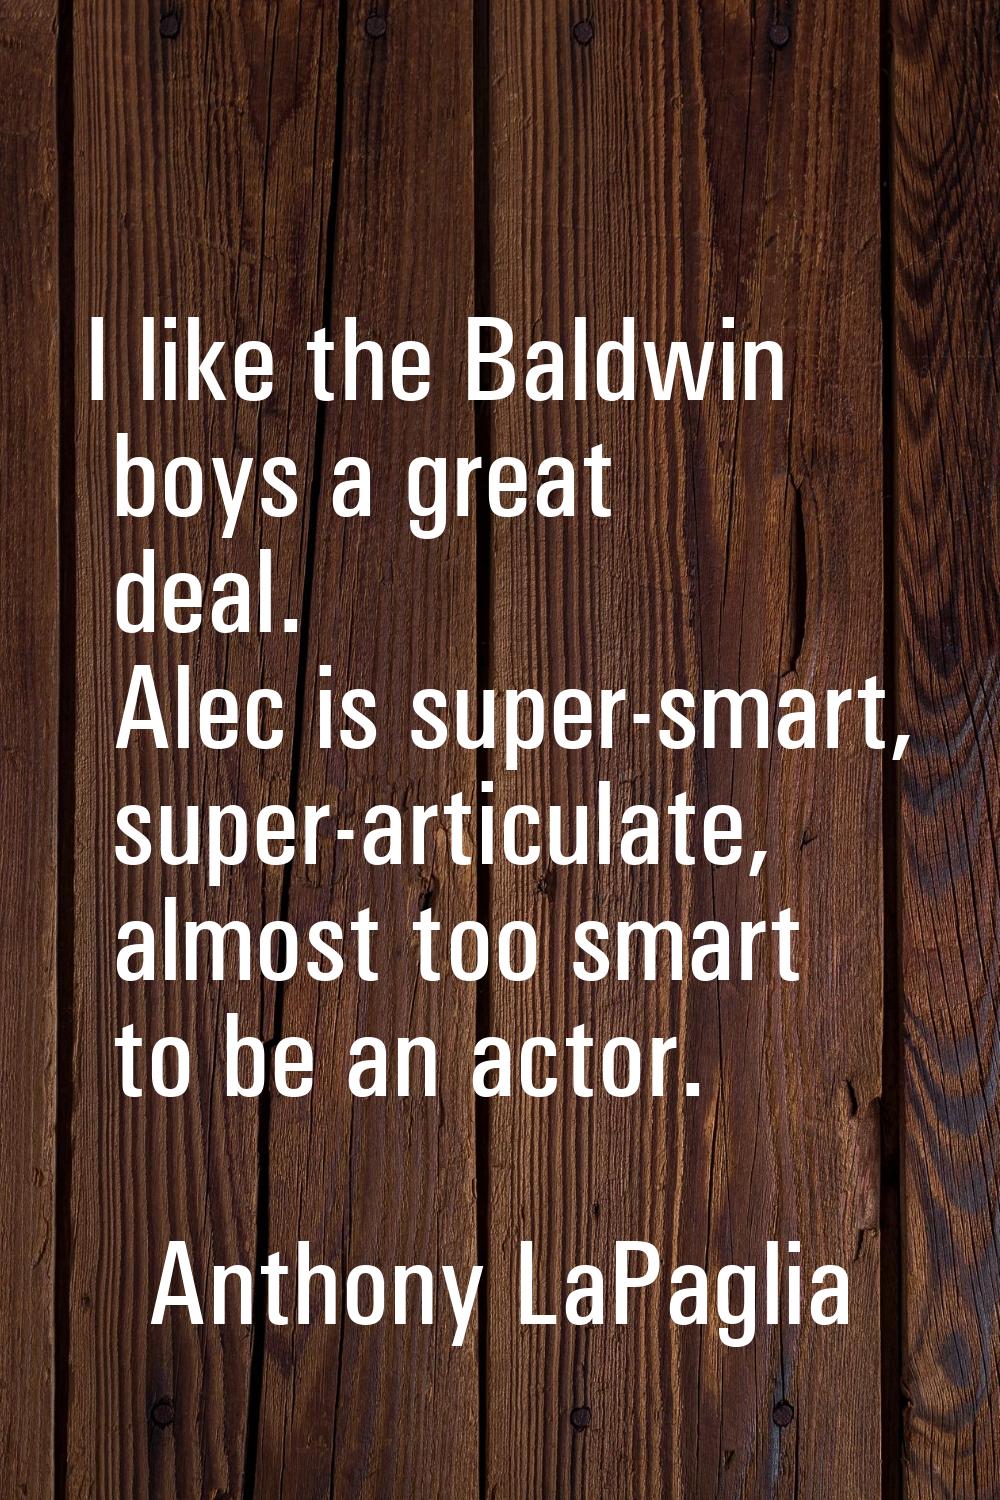 I like the Baldwin boys a great deal. Alec is super-smart, super-articulate, almost too smart to be